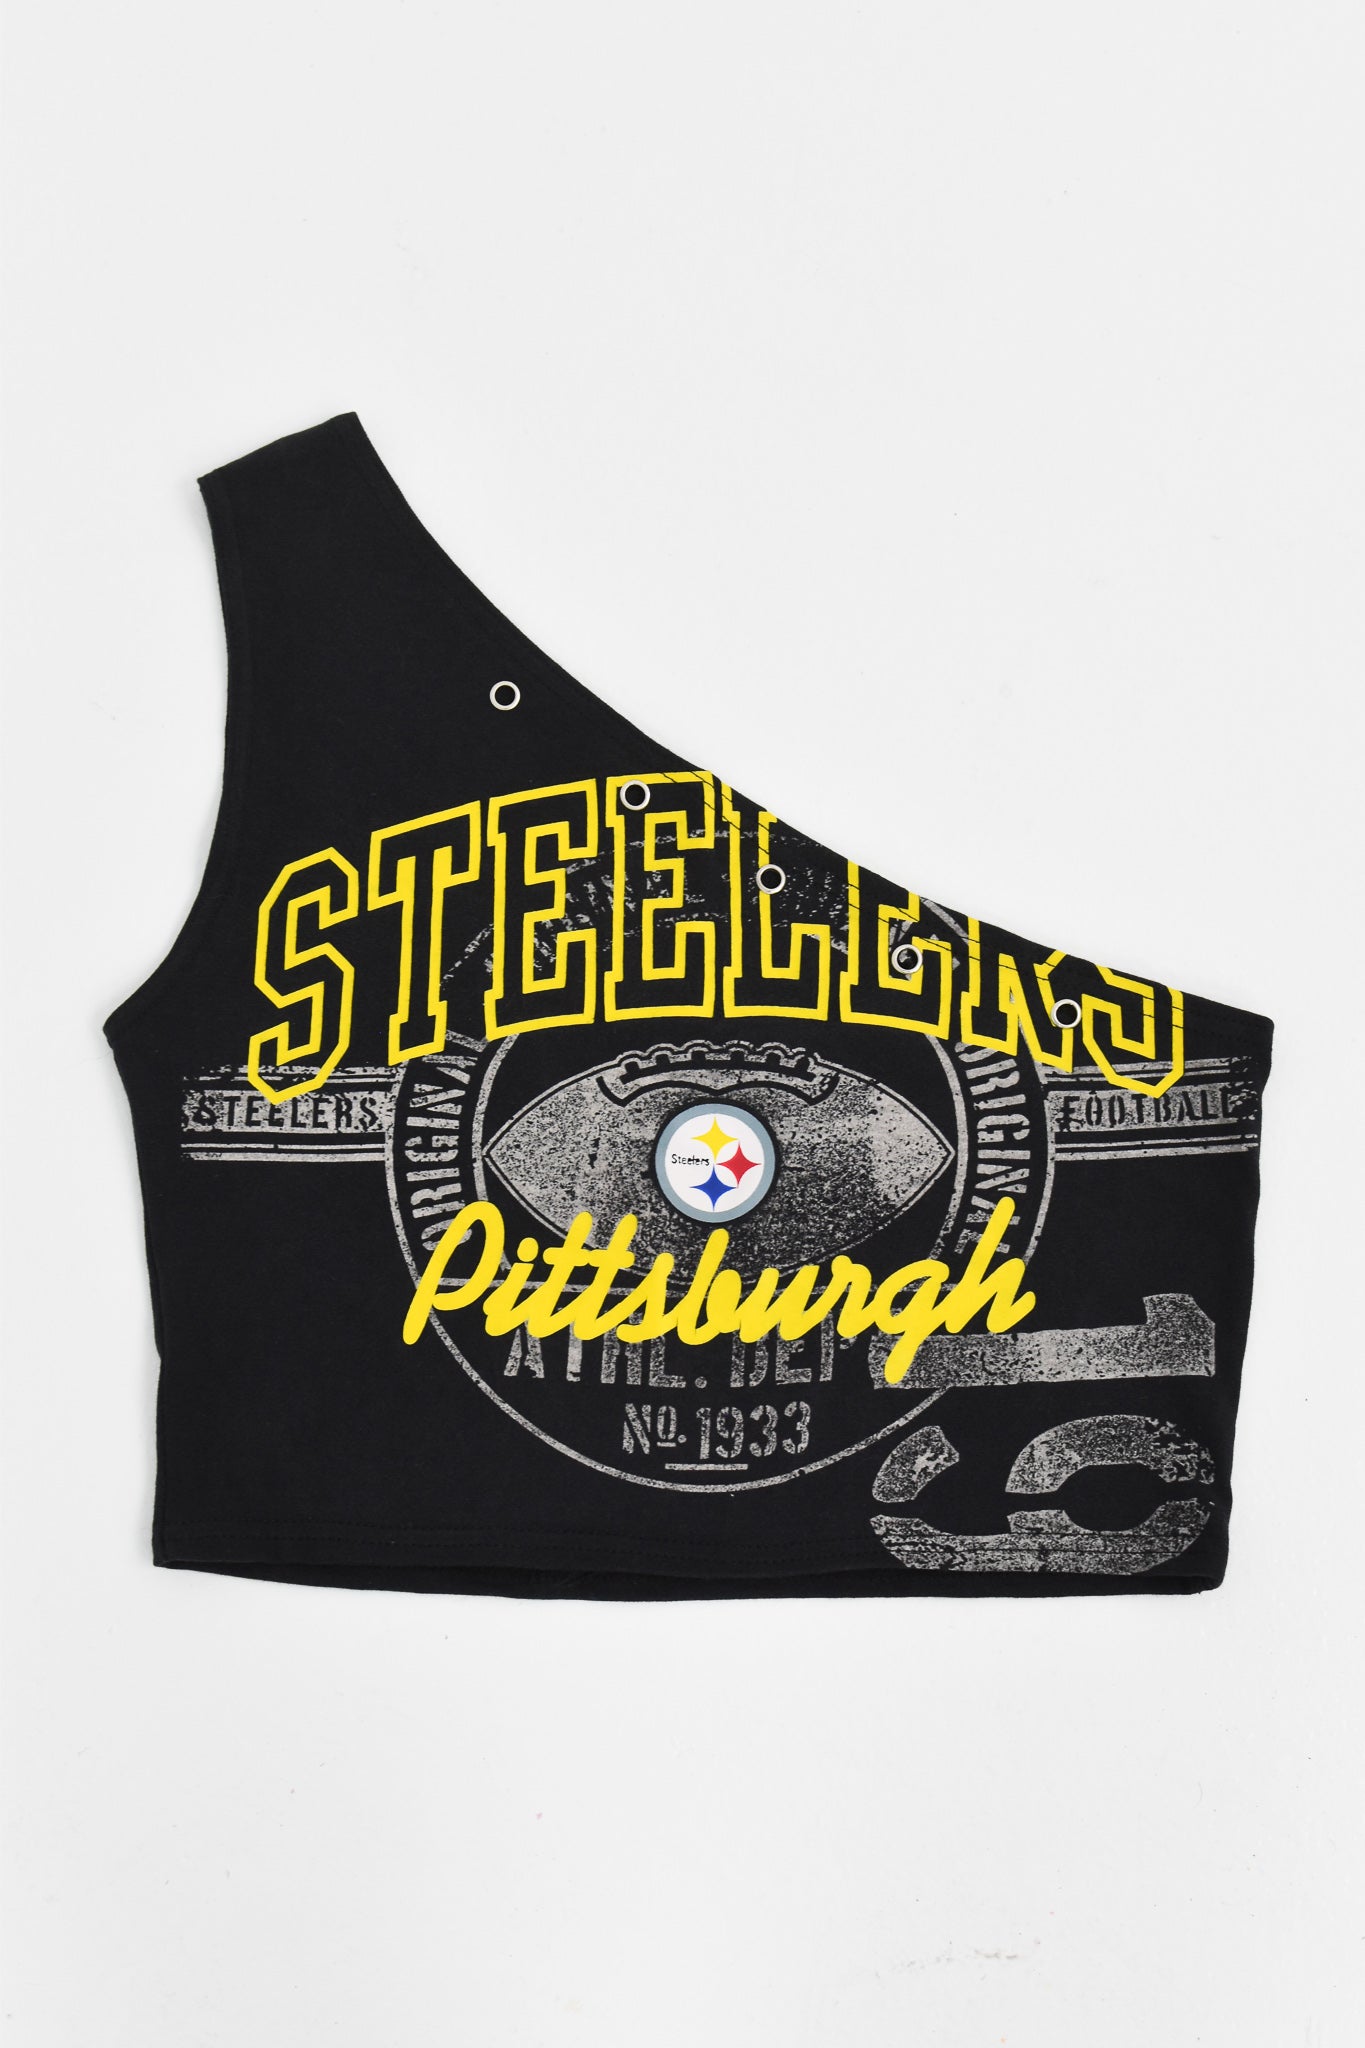 Upcycled Steelers One Shoulder Tank Top